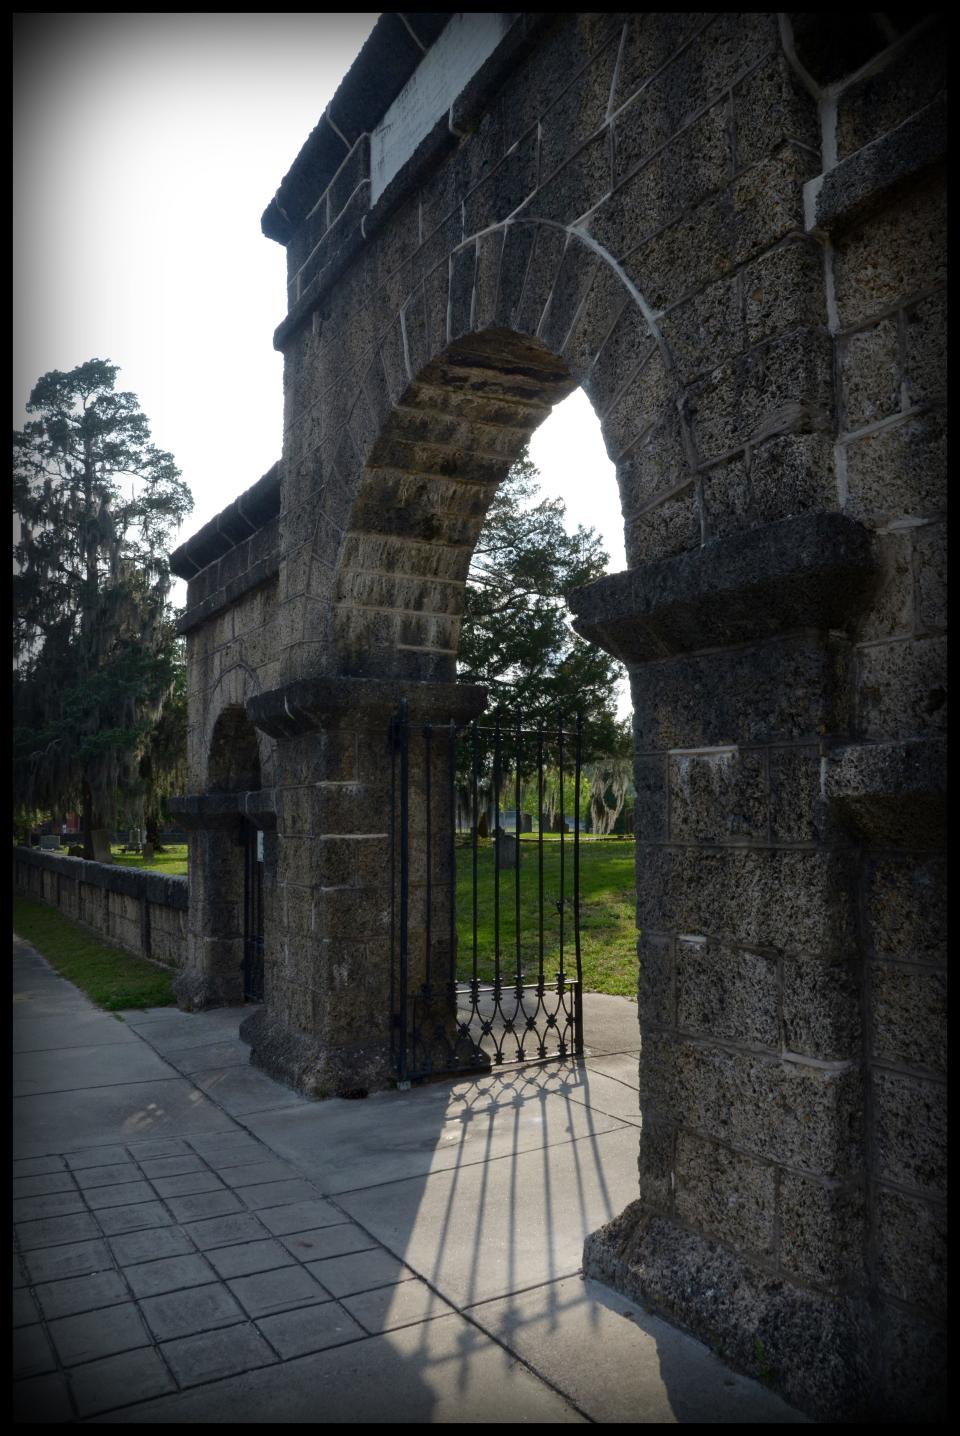 The cemetery's famous entrance arch is the subject of a damp, and possibly deadly, legend.